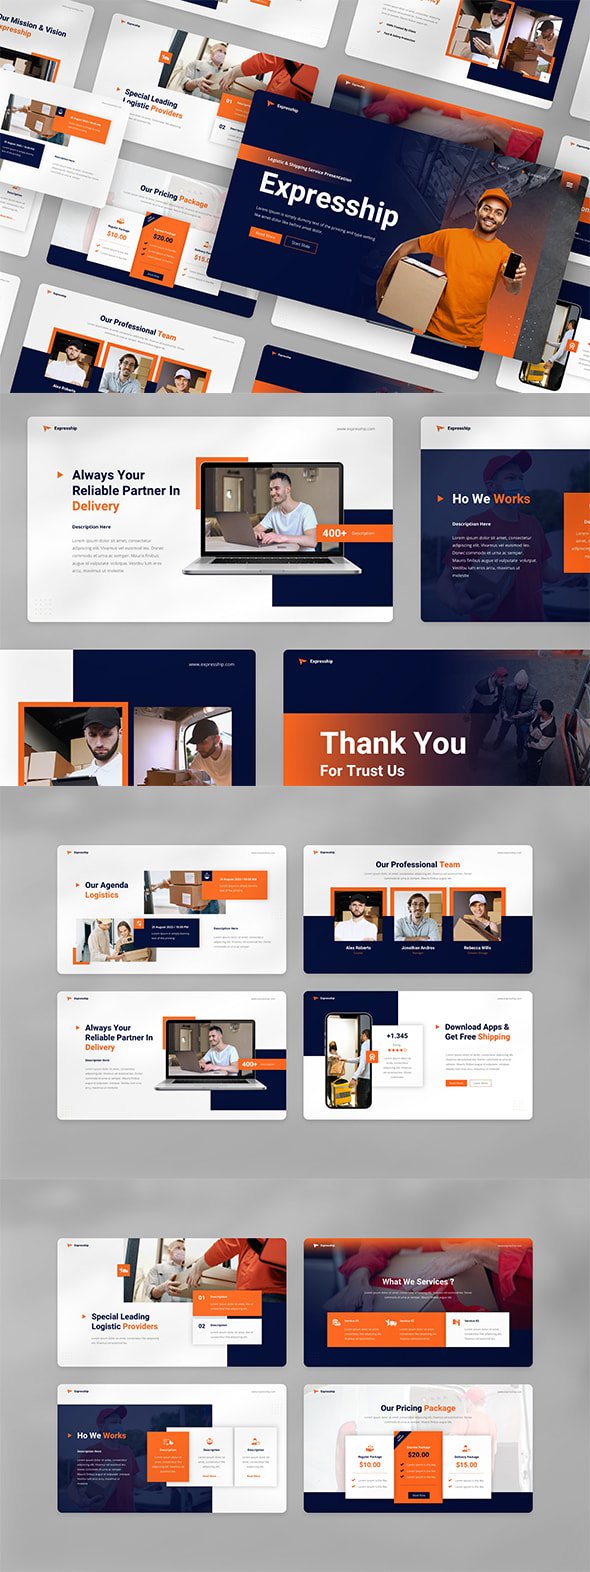 GraphicRiver - Expresship - Logistic & Shipping Service Keynote Template - 45258758